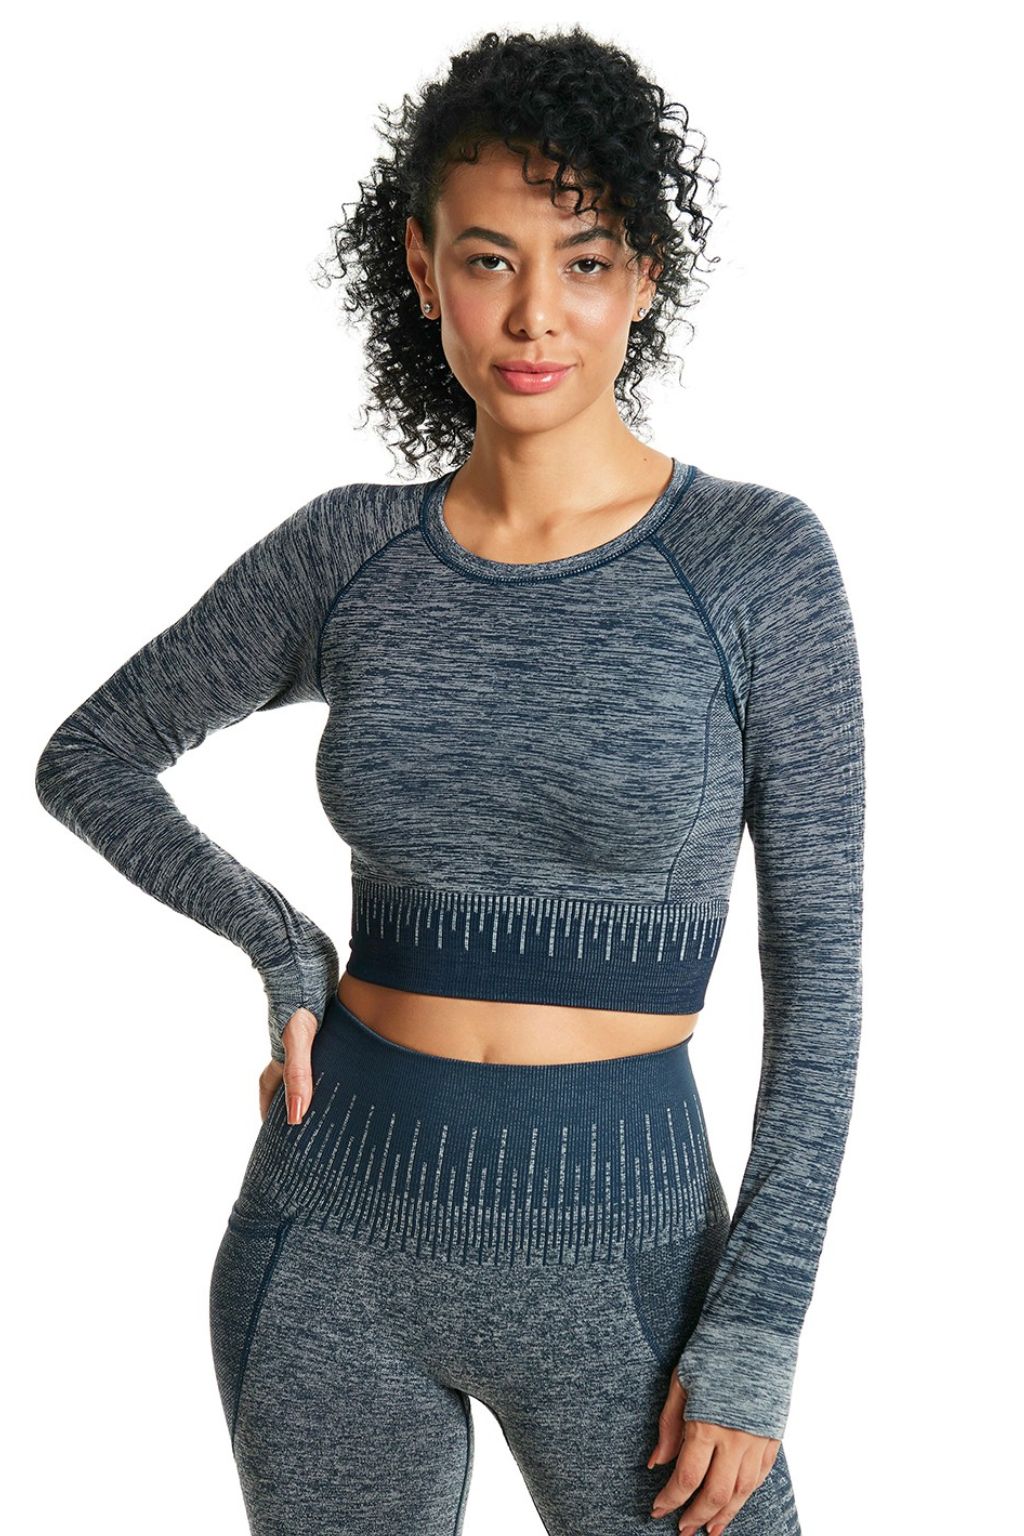 FITNESS Cropped Long Sleeve Top